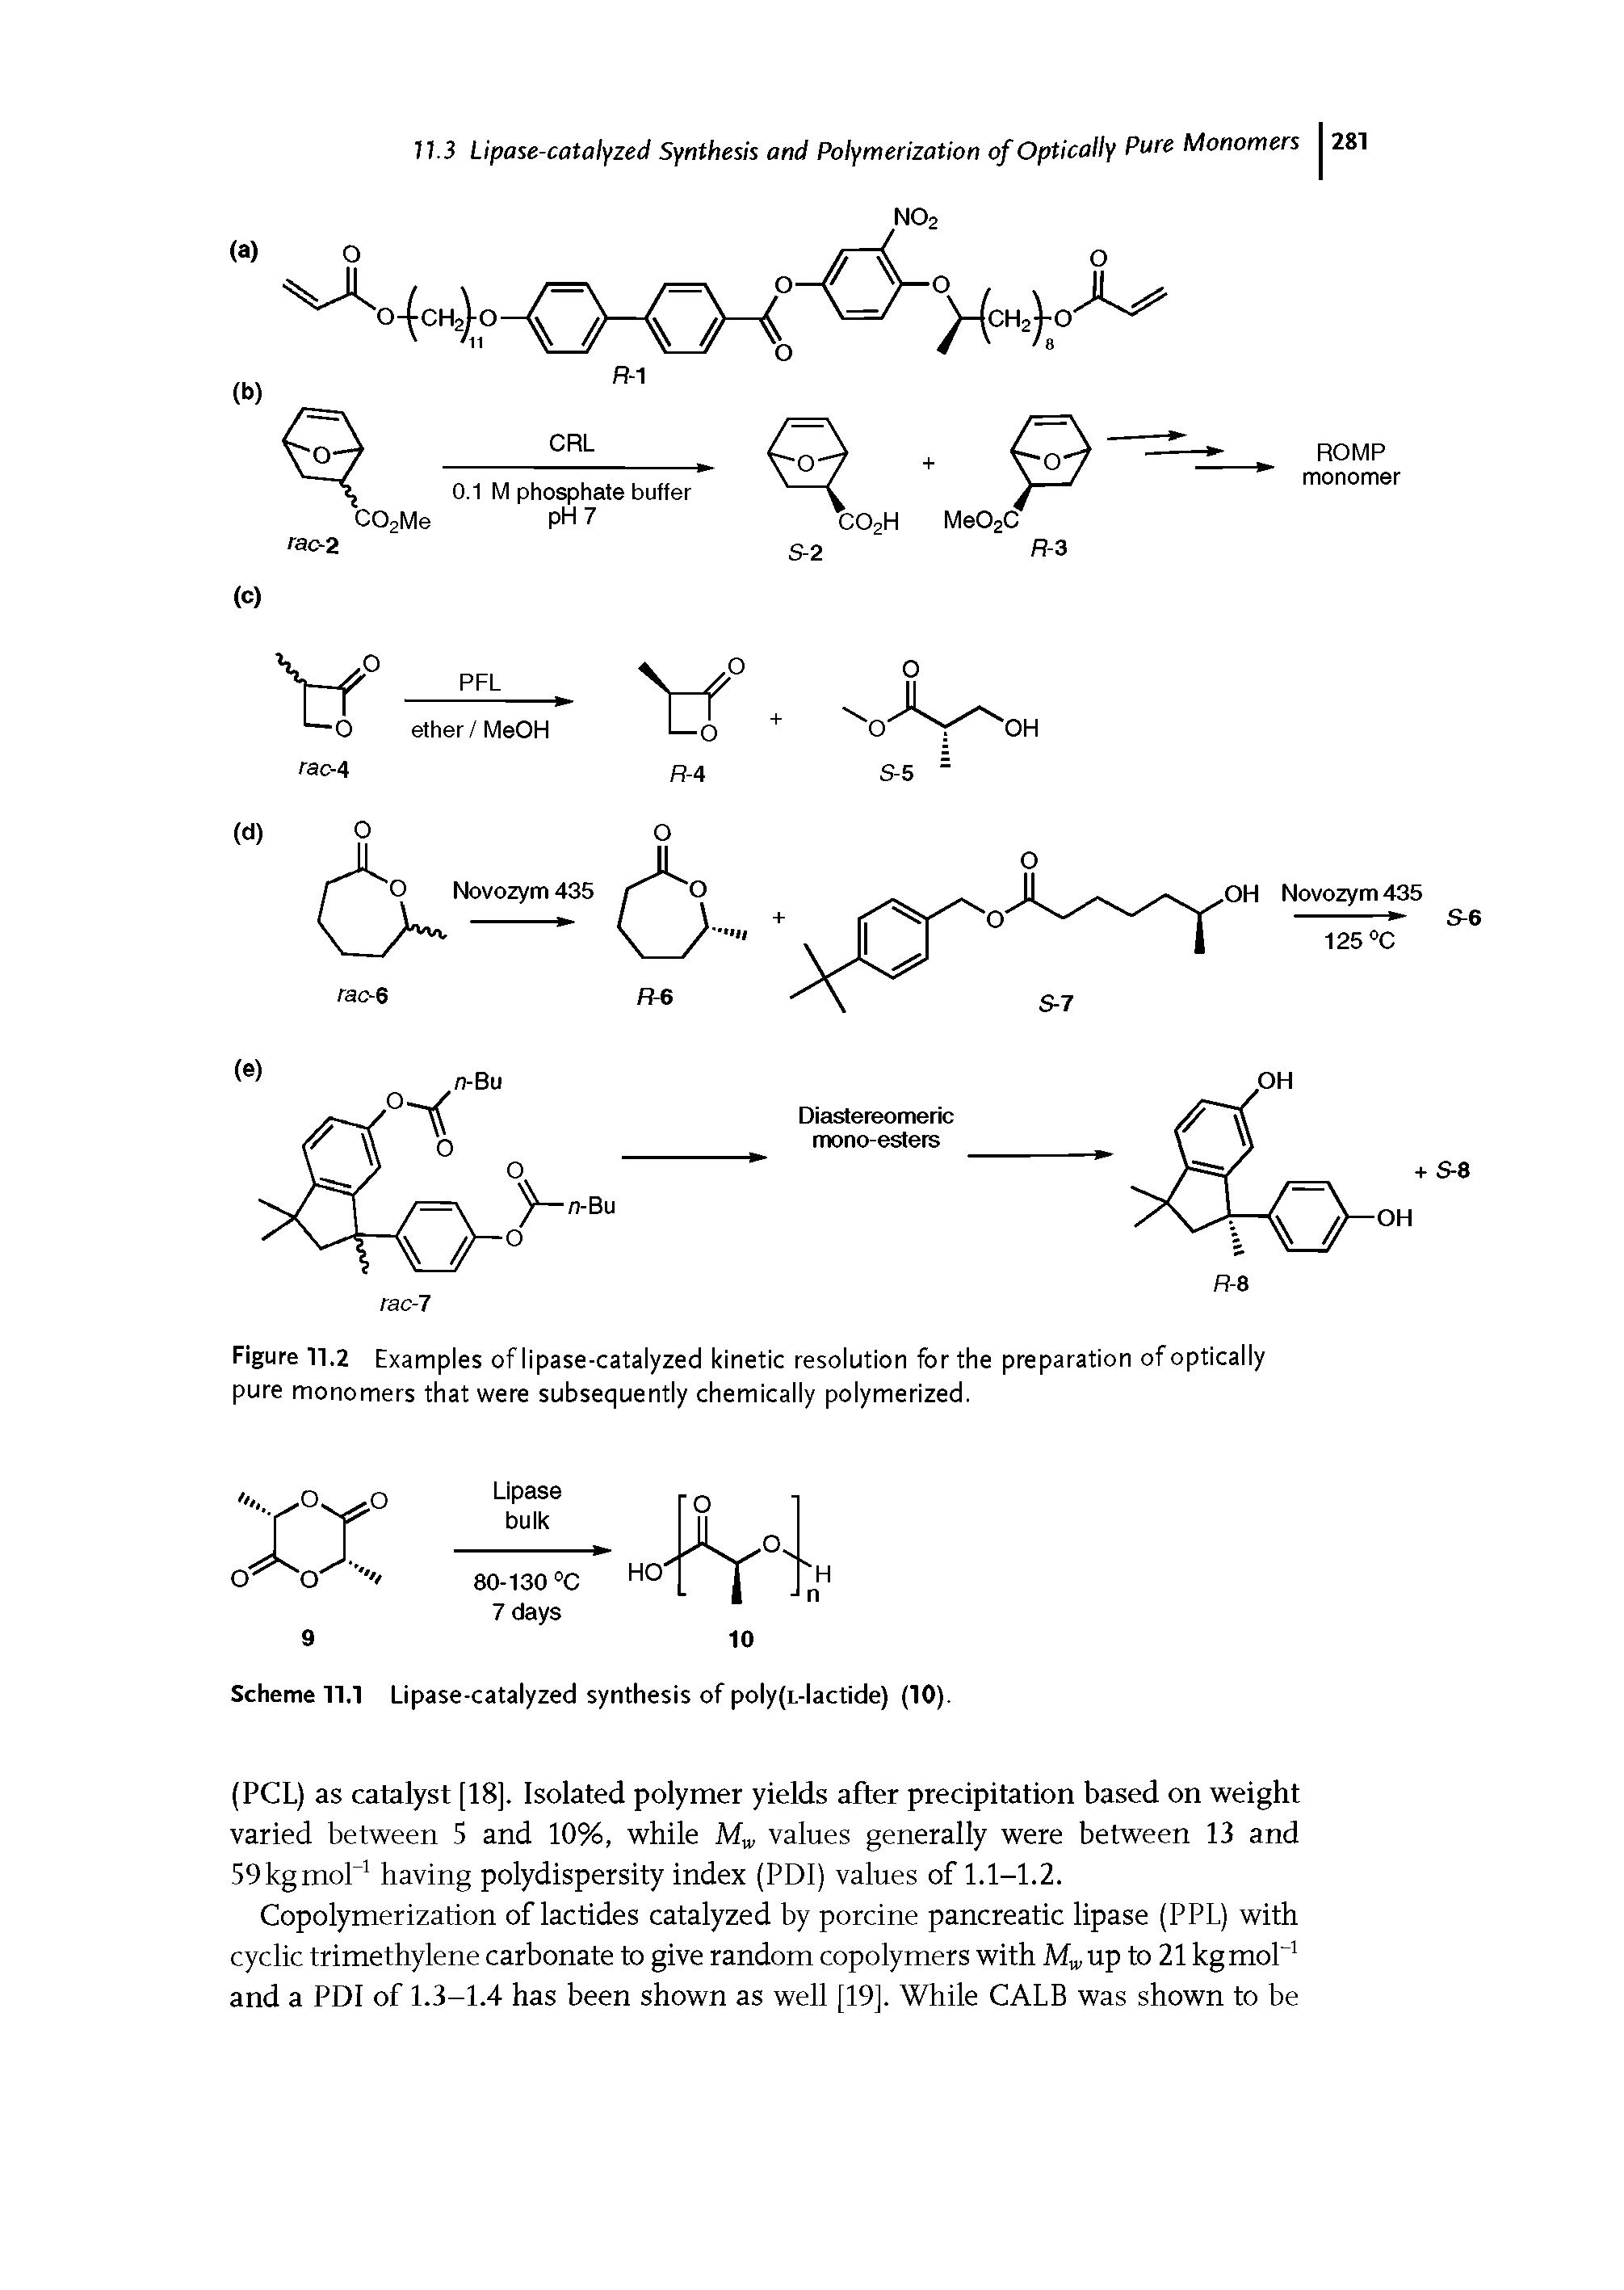 Scheme 11.1 Lipase-catalyzed synthesis of poly(L-lactide) (10).